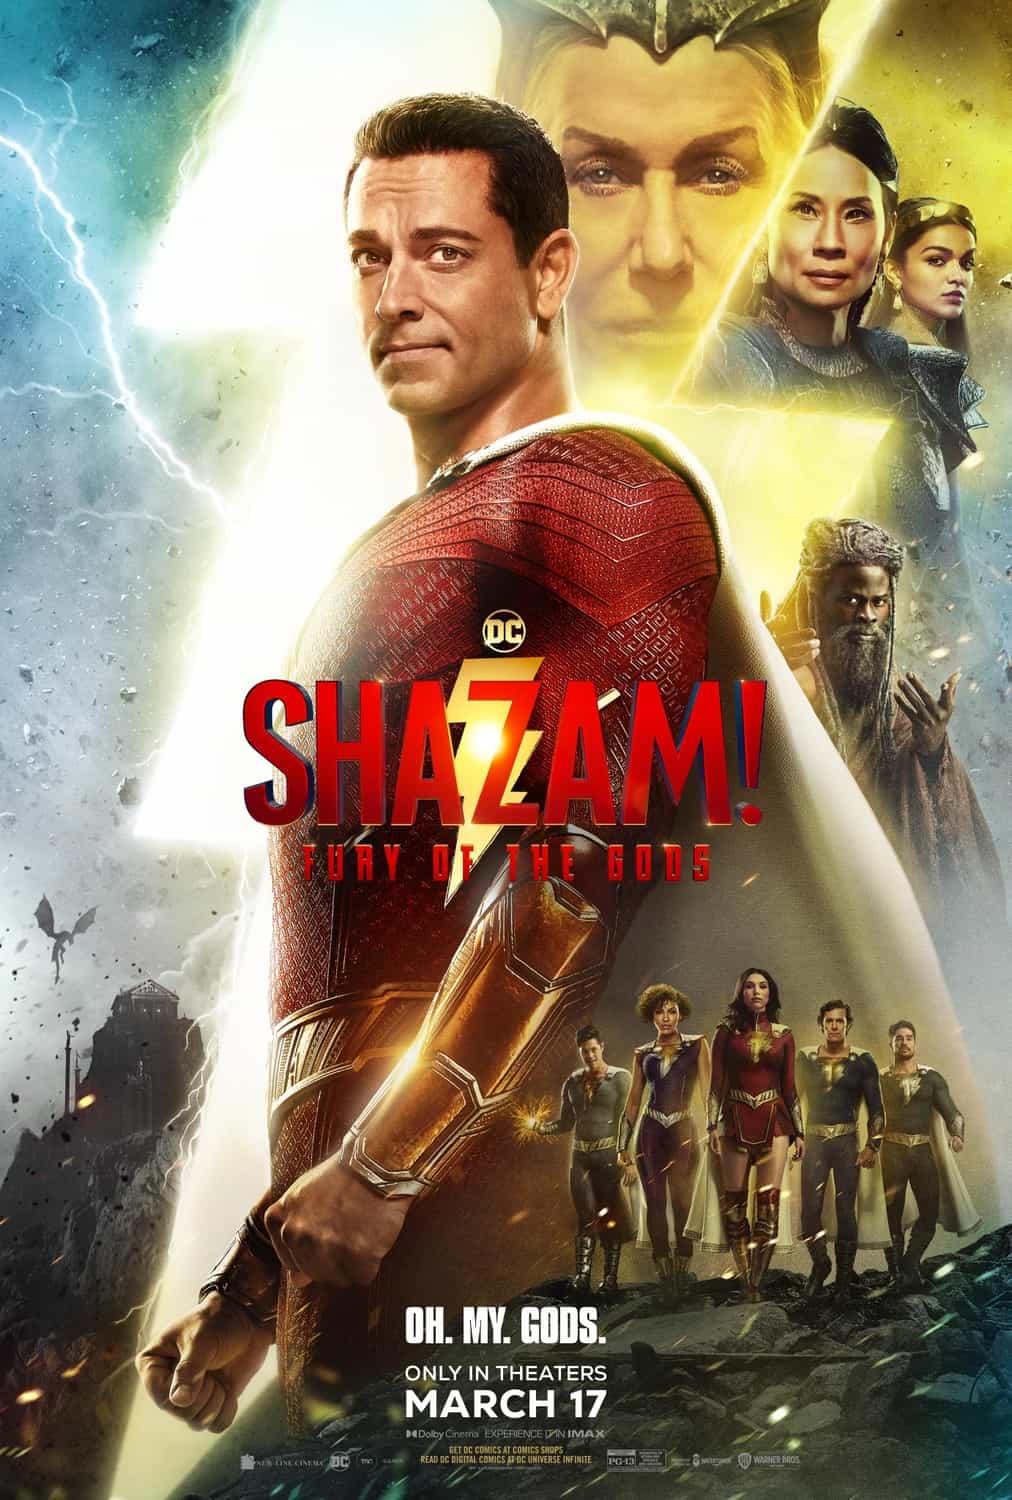 UK Box Office Weekend Report 17th - 19th March 2023:  Shazam! Fury of the Gods makes its debut at the top of the UK box office with over 2 Million pound